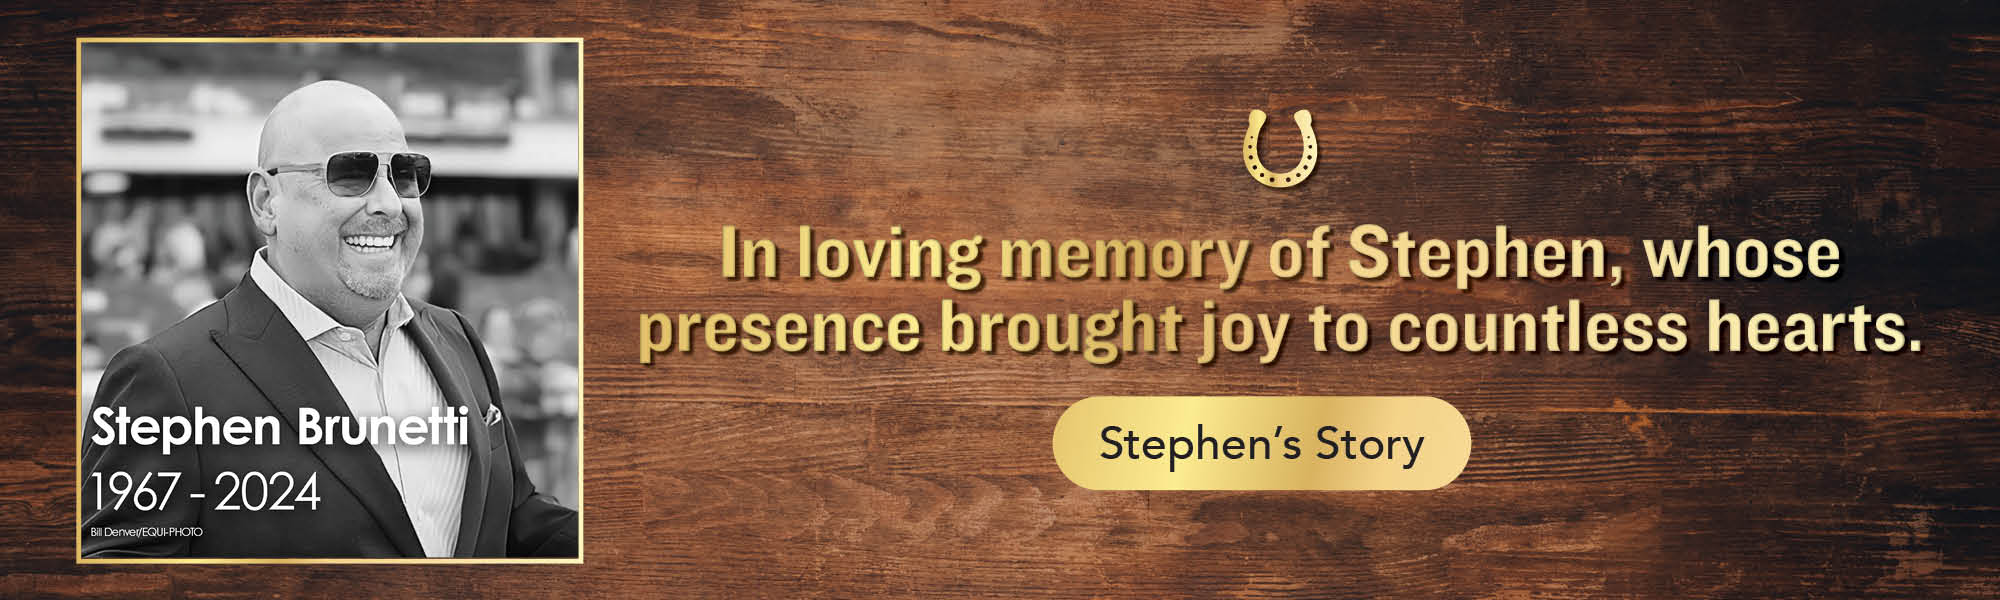 In loving memory of Stephen, whose presence brought joy to countless hearts. Stephen's Story